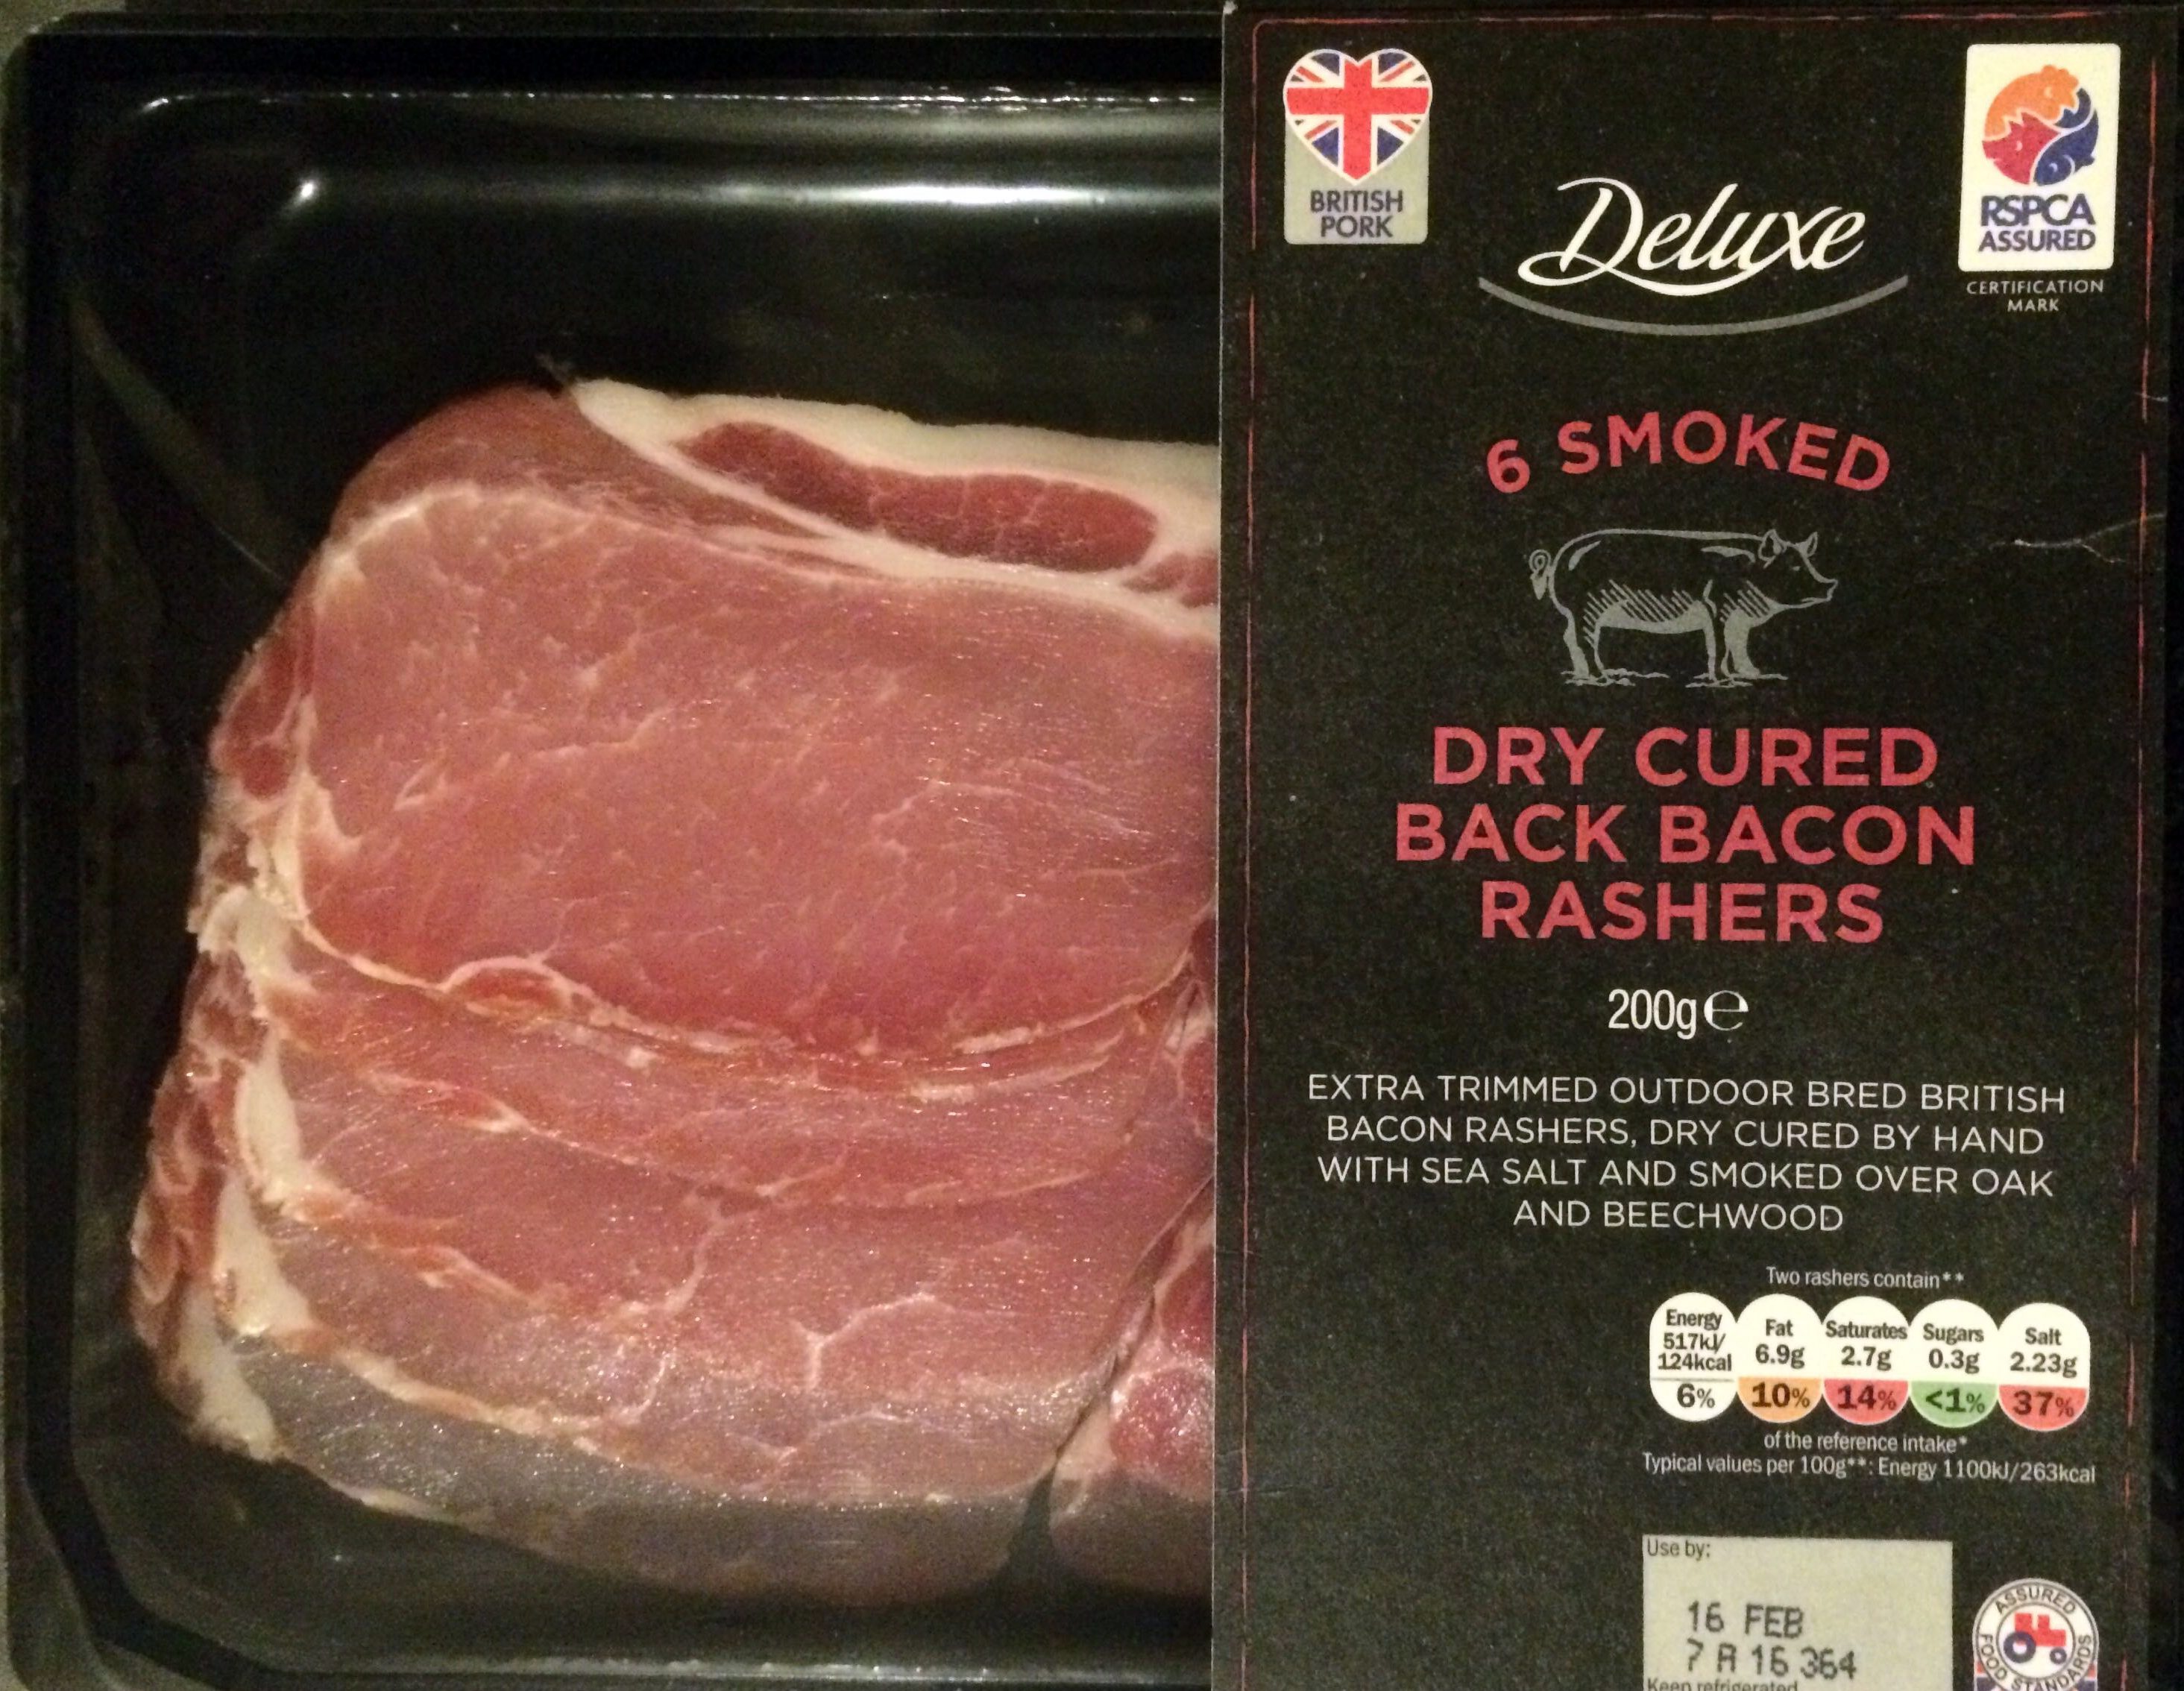 6 smoked dried cured back bacon rashers - Product